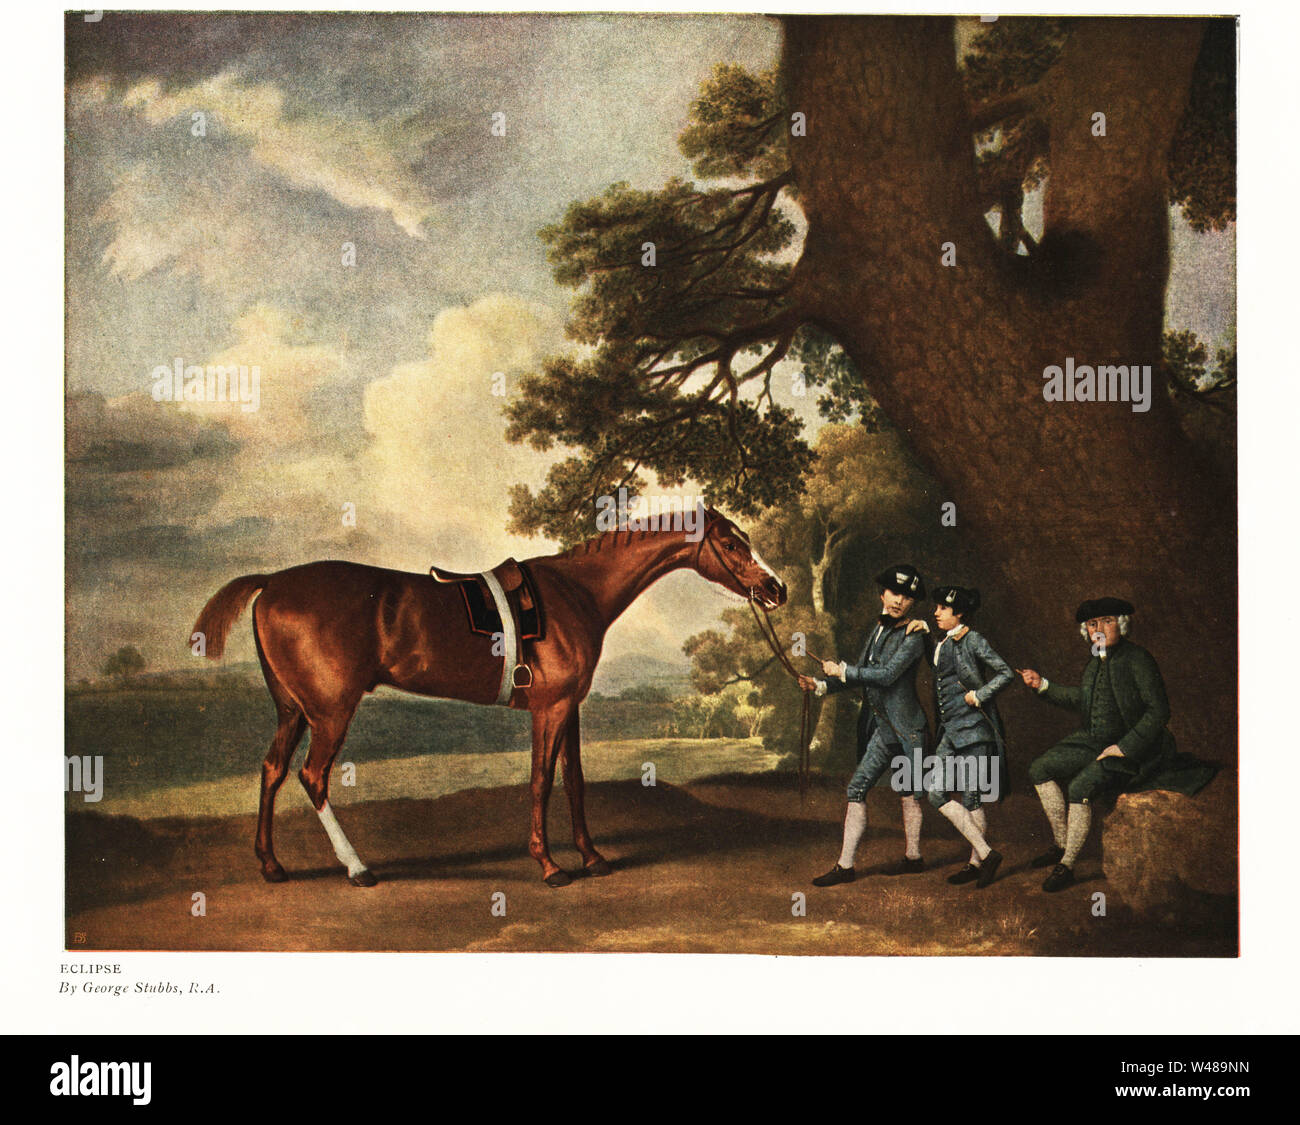 Eclipse, winner of 18 races. Portrait of the champion thoroughbred horse with grooms and trainer. From Stubbs Turf Gallery, 1796. Color print after a painting by George Stubbs in Ralph Nevill’s Old Sporting Prints, The Connoisseur Magazine, London, 1908. Stock Photo